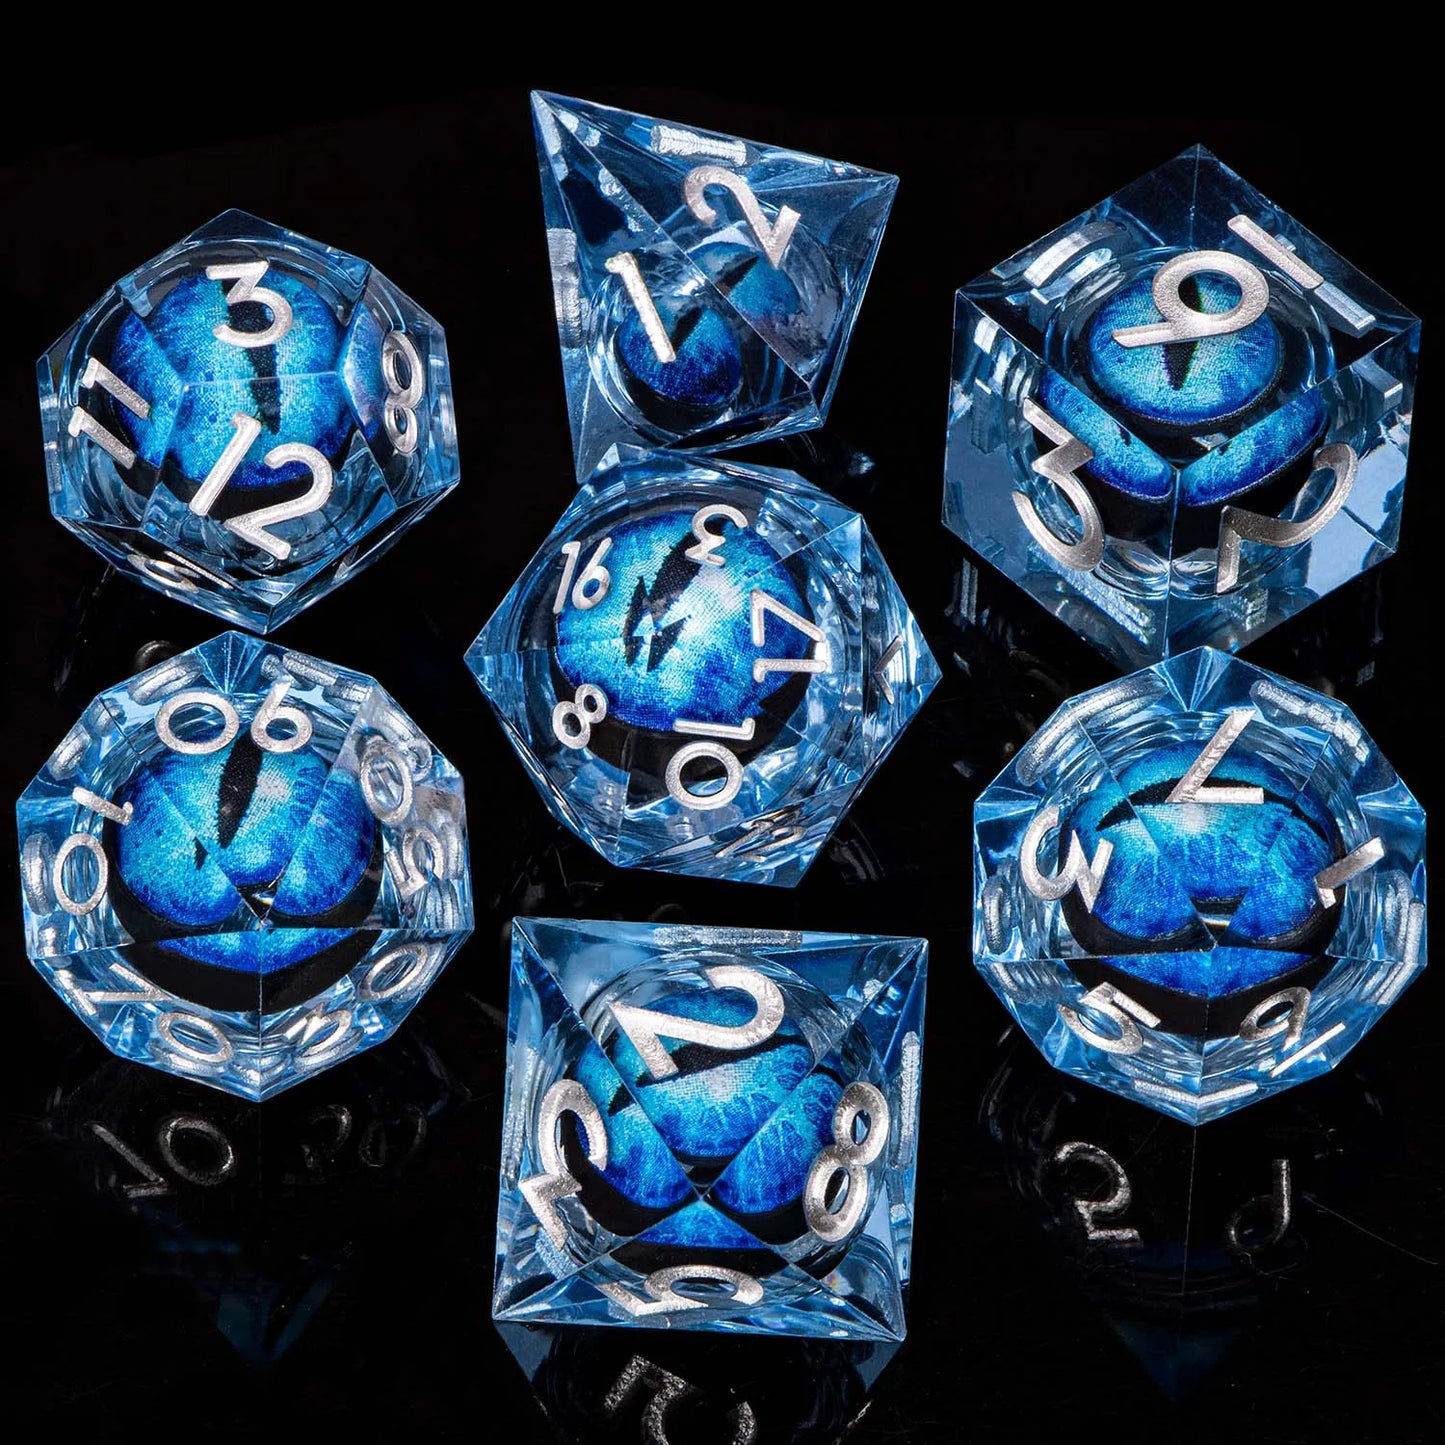 ORIFANTOU DND Red Rings & Liquid Flow Eye Sharp Edge Resin Dice Set D&D Dungeon and Dragon Handmade D20 D and D Polyhedral Dice YY-13